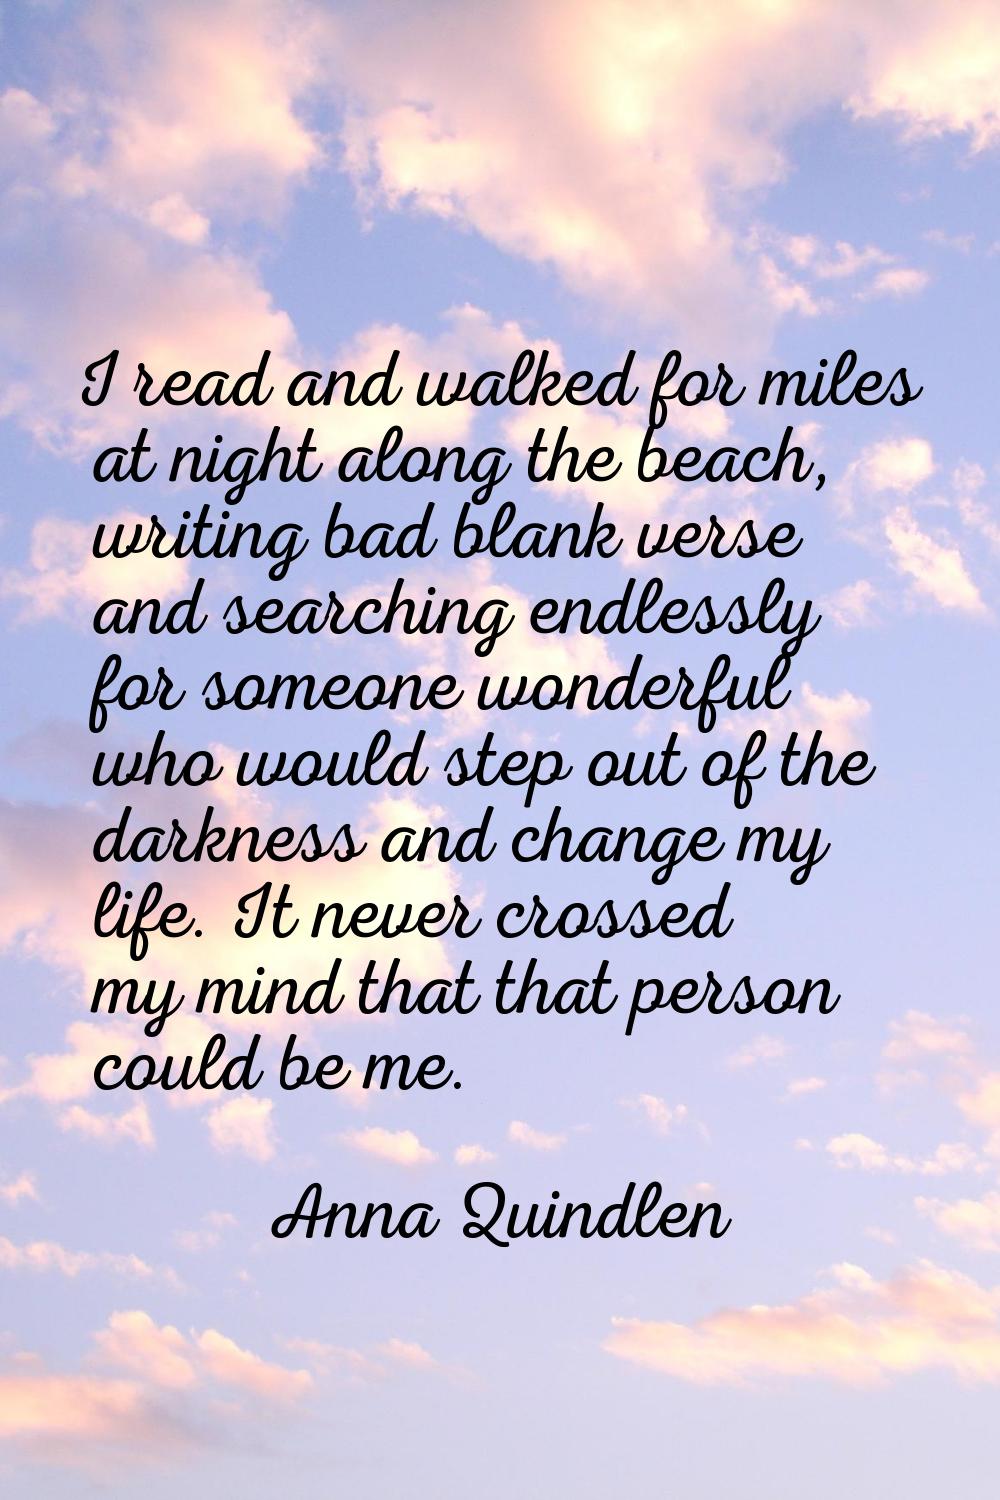 I read and walked for miles at night along the beach, writing bad blank verse and searching endless